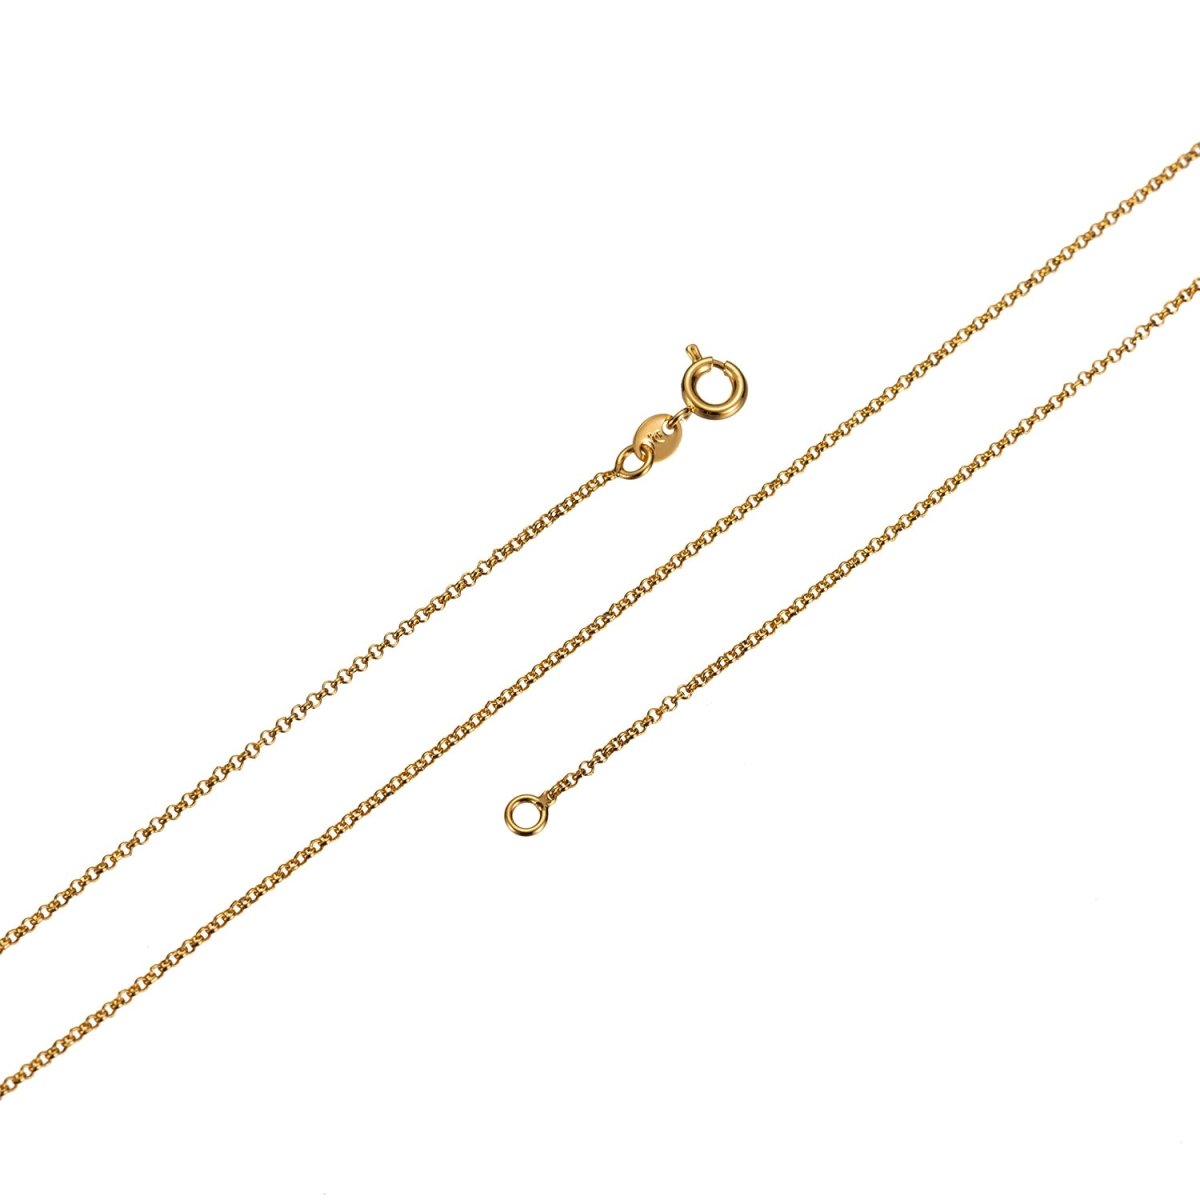 17.7 inch Rolo Necklace Chain For Jewelry Making, 24K Gold Plated Rolo Necklace, Dainty 1mm Rolo Necklace w/ Spring Ring | CN-443 Clearance Pricing - DLUXCA